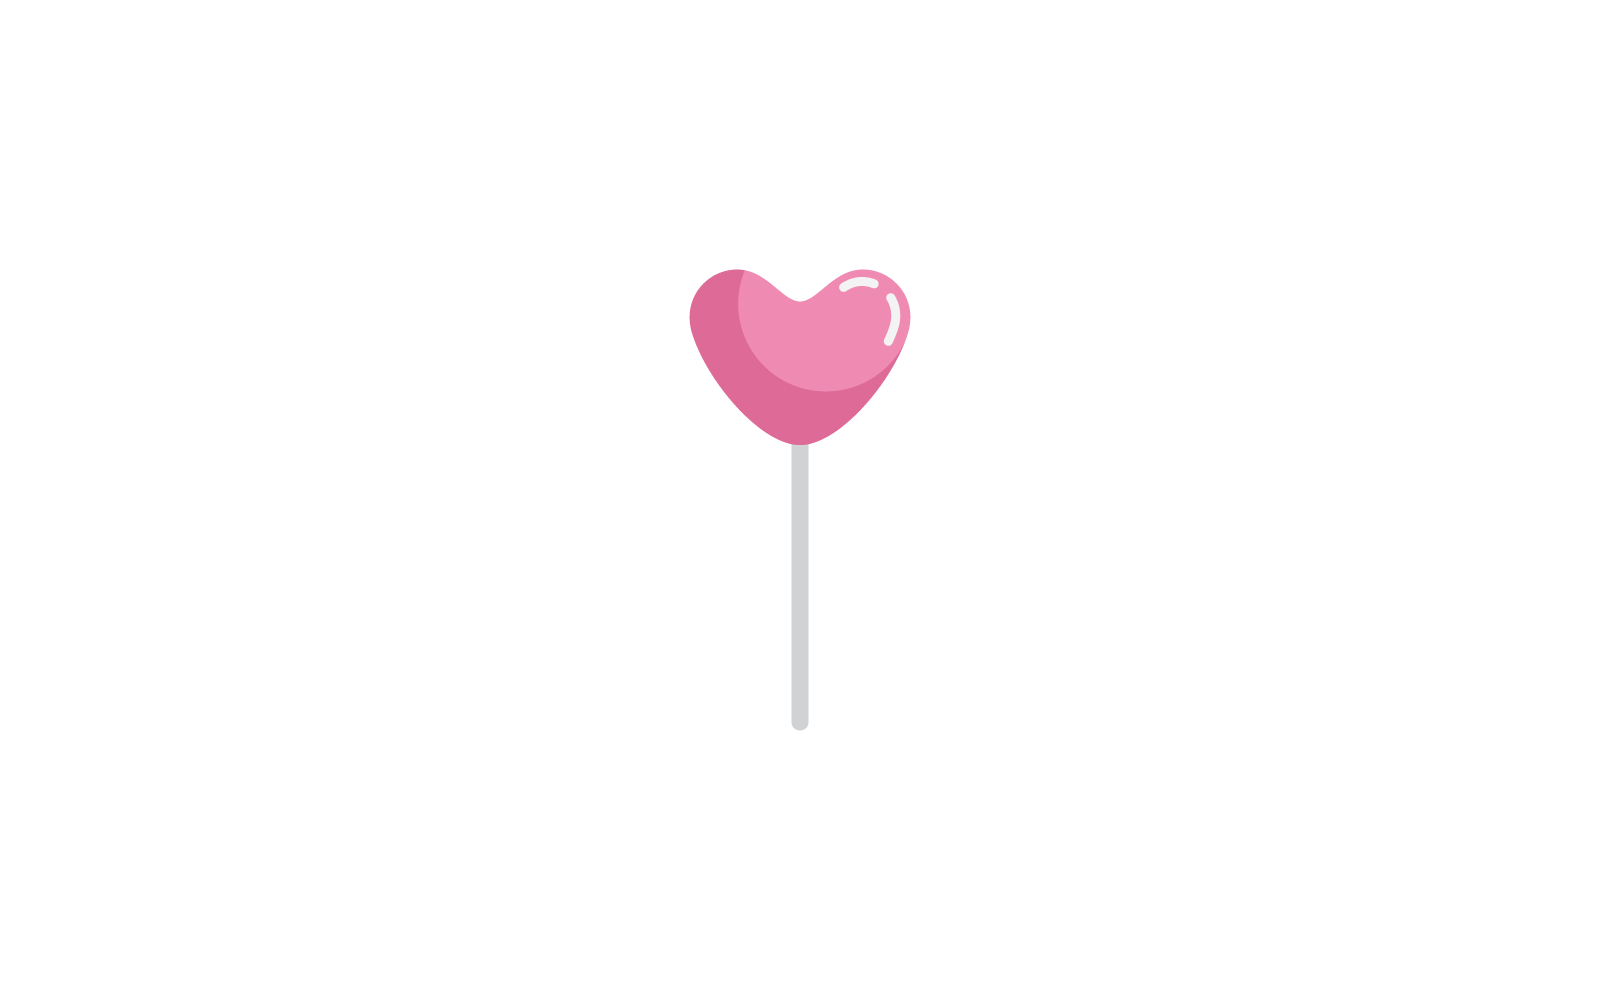 Sweet Candy icon illustration vector flat design template